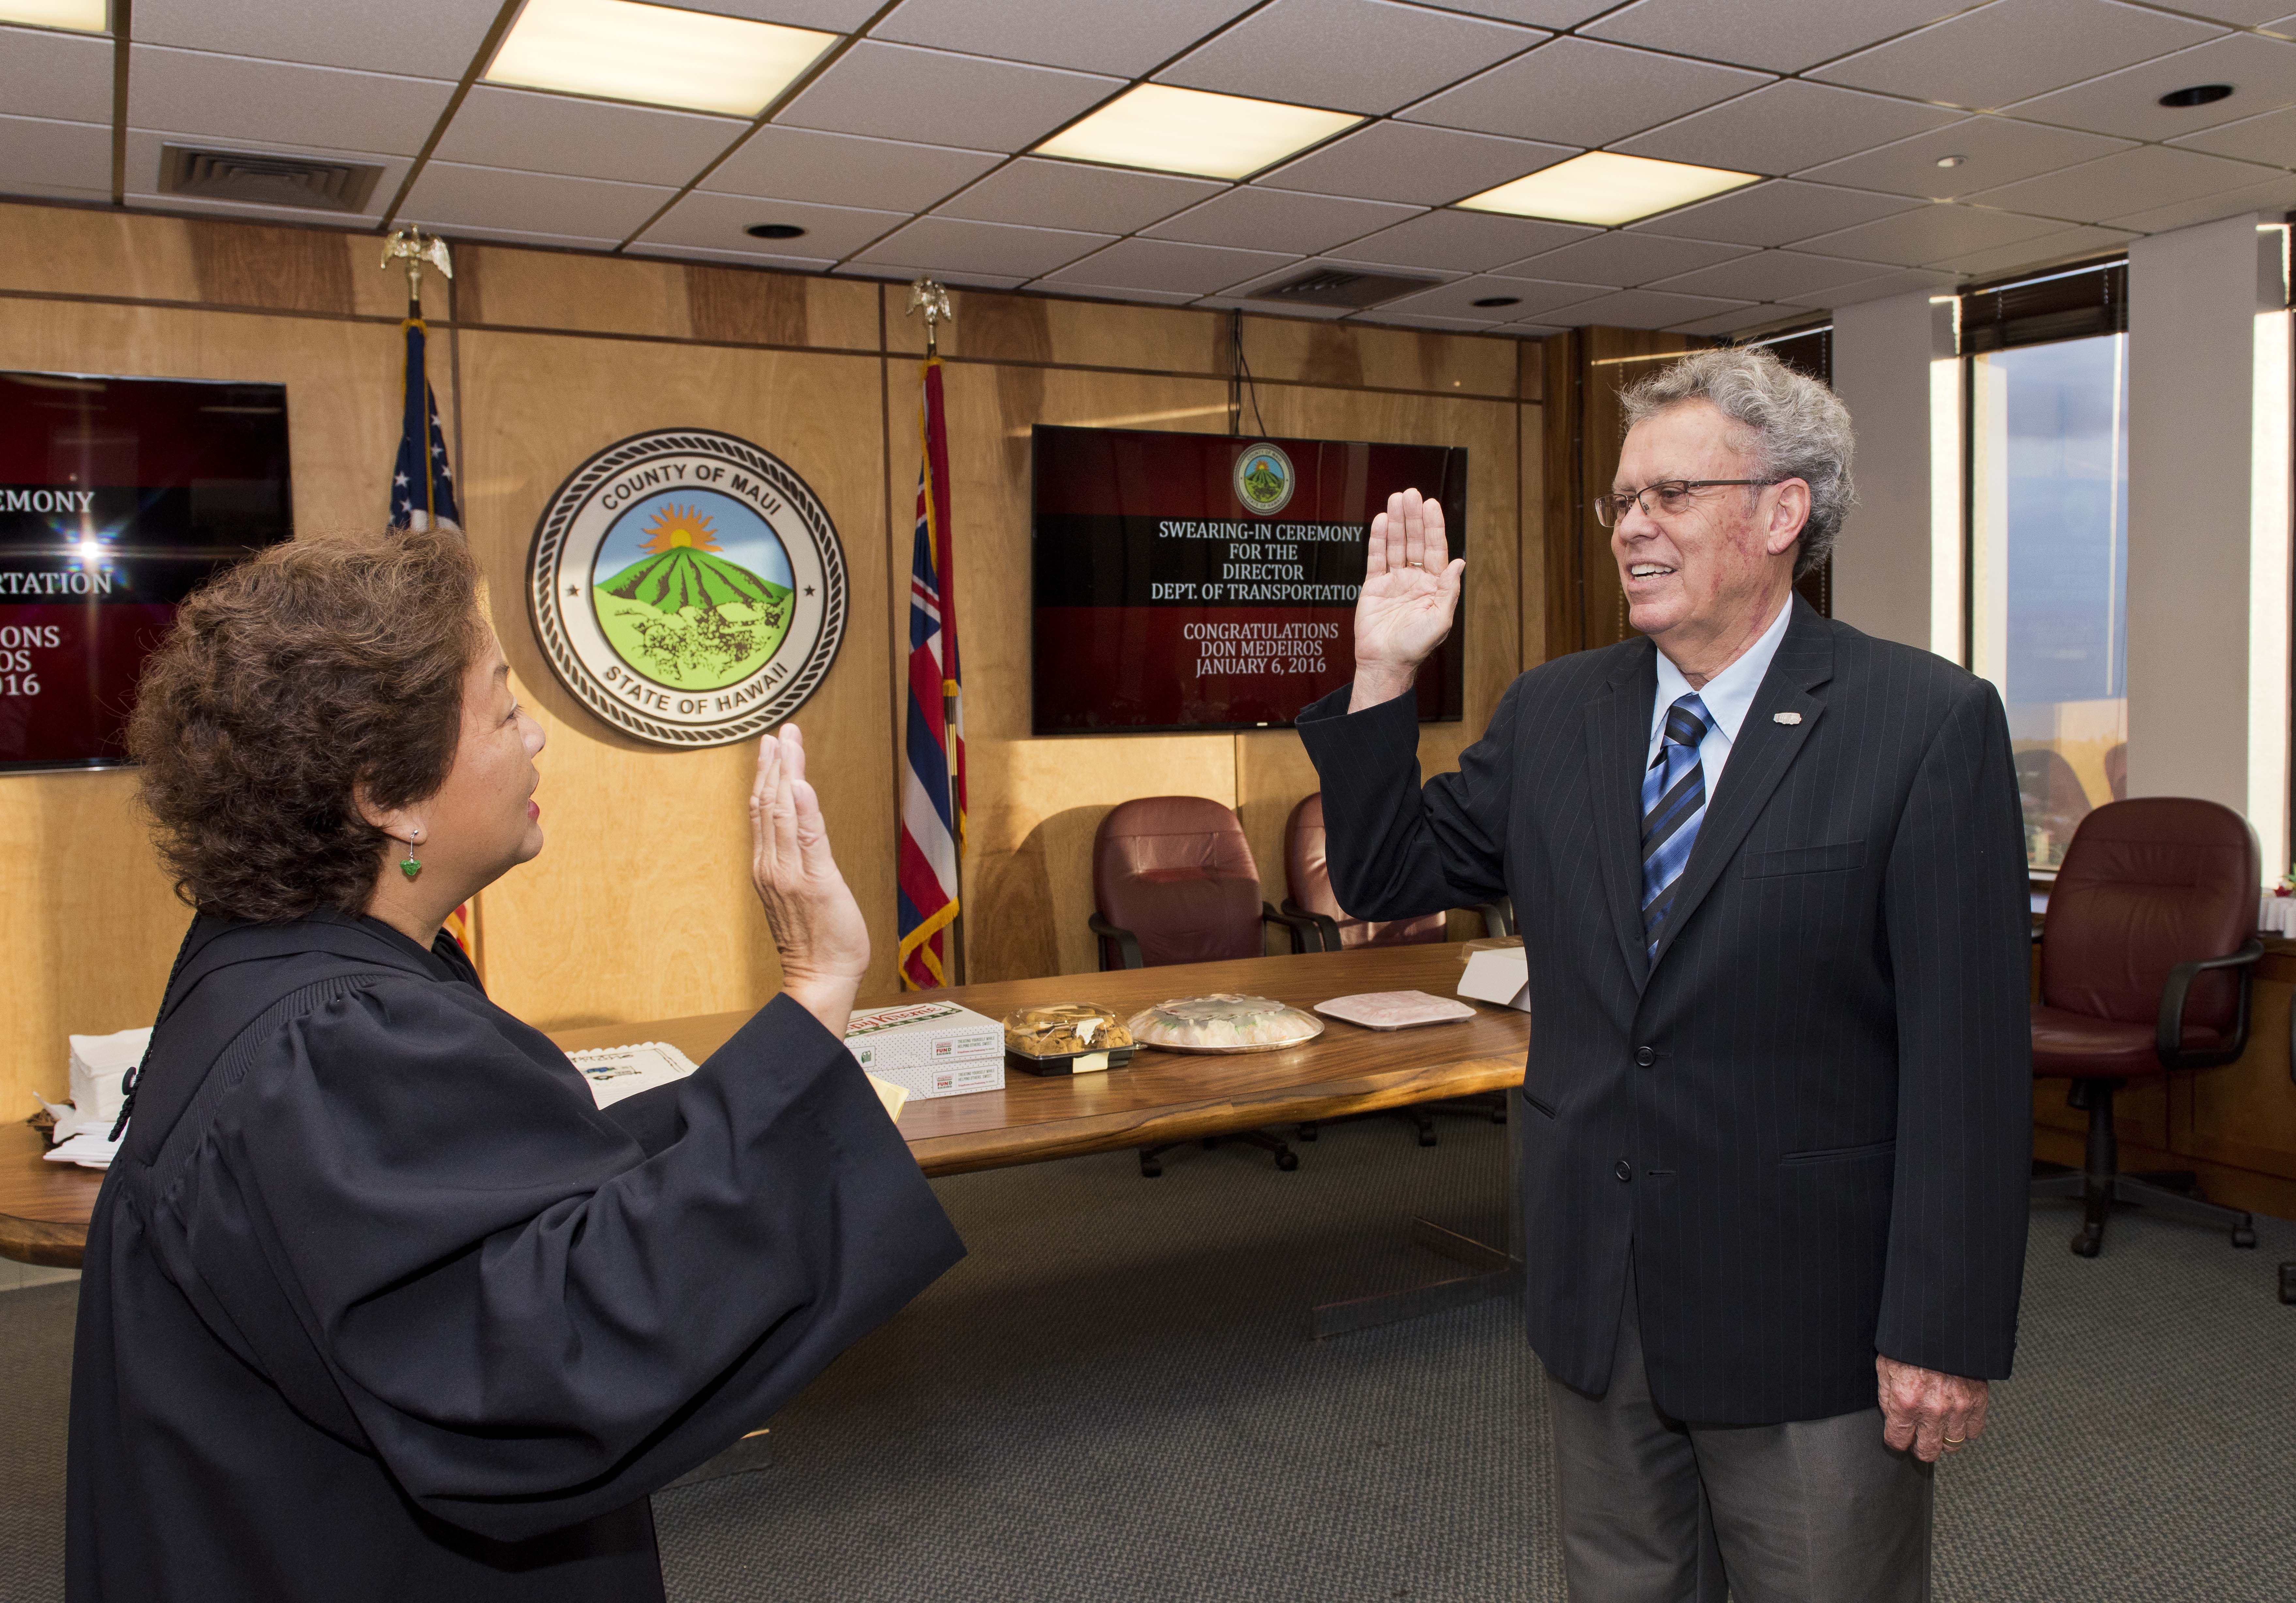 Judge Rhonda Loo swearing-in of the new Director of Transportation Don Medeiros. Photo: County of Maui/RYAN PIROS